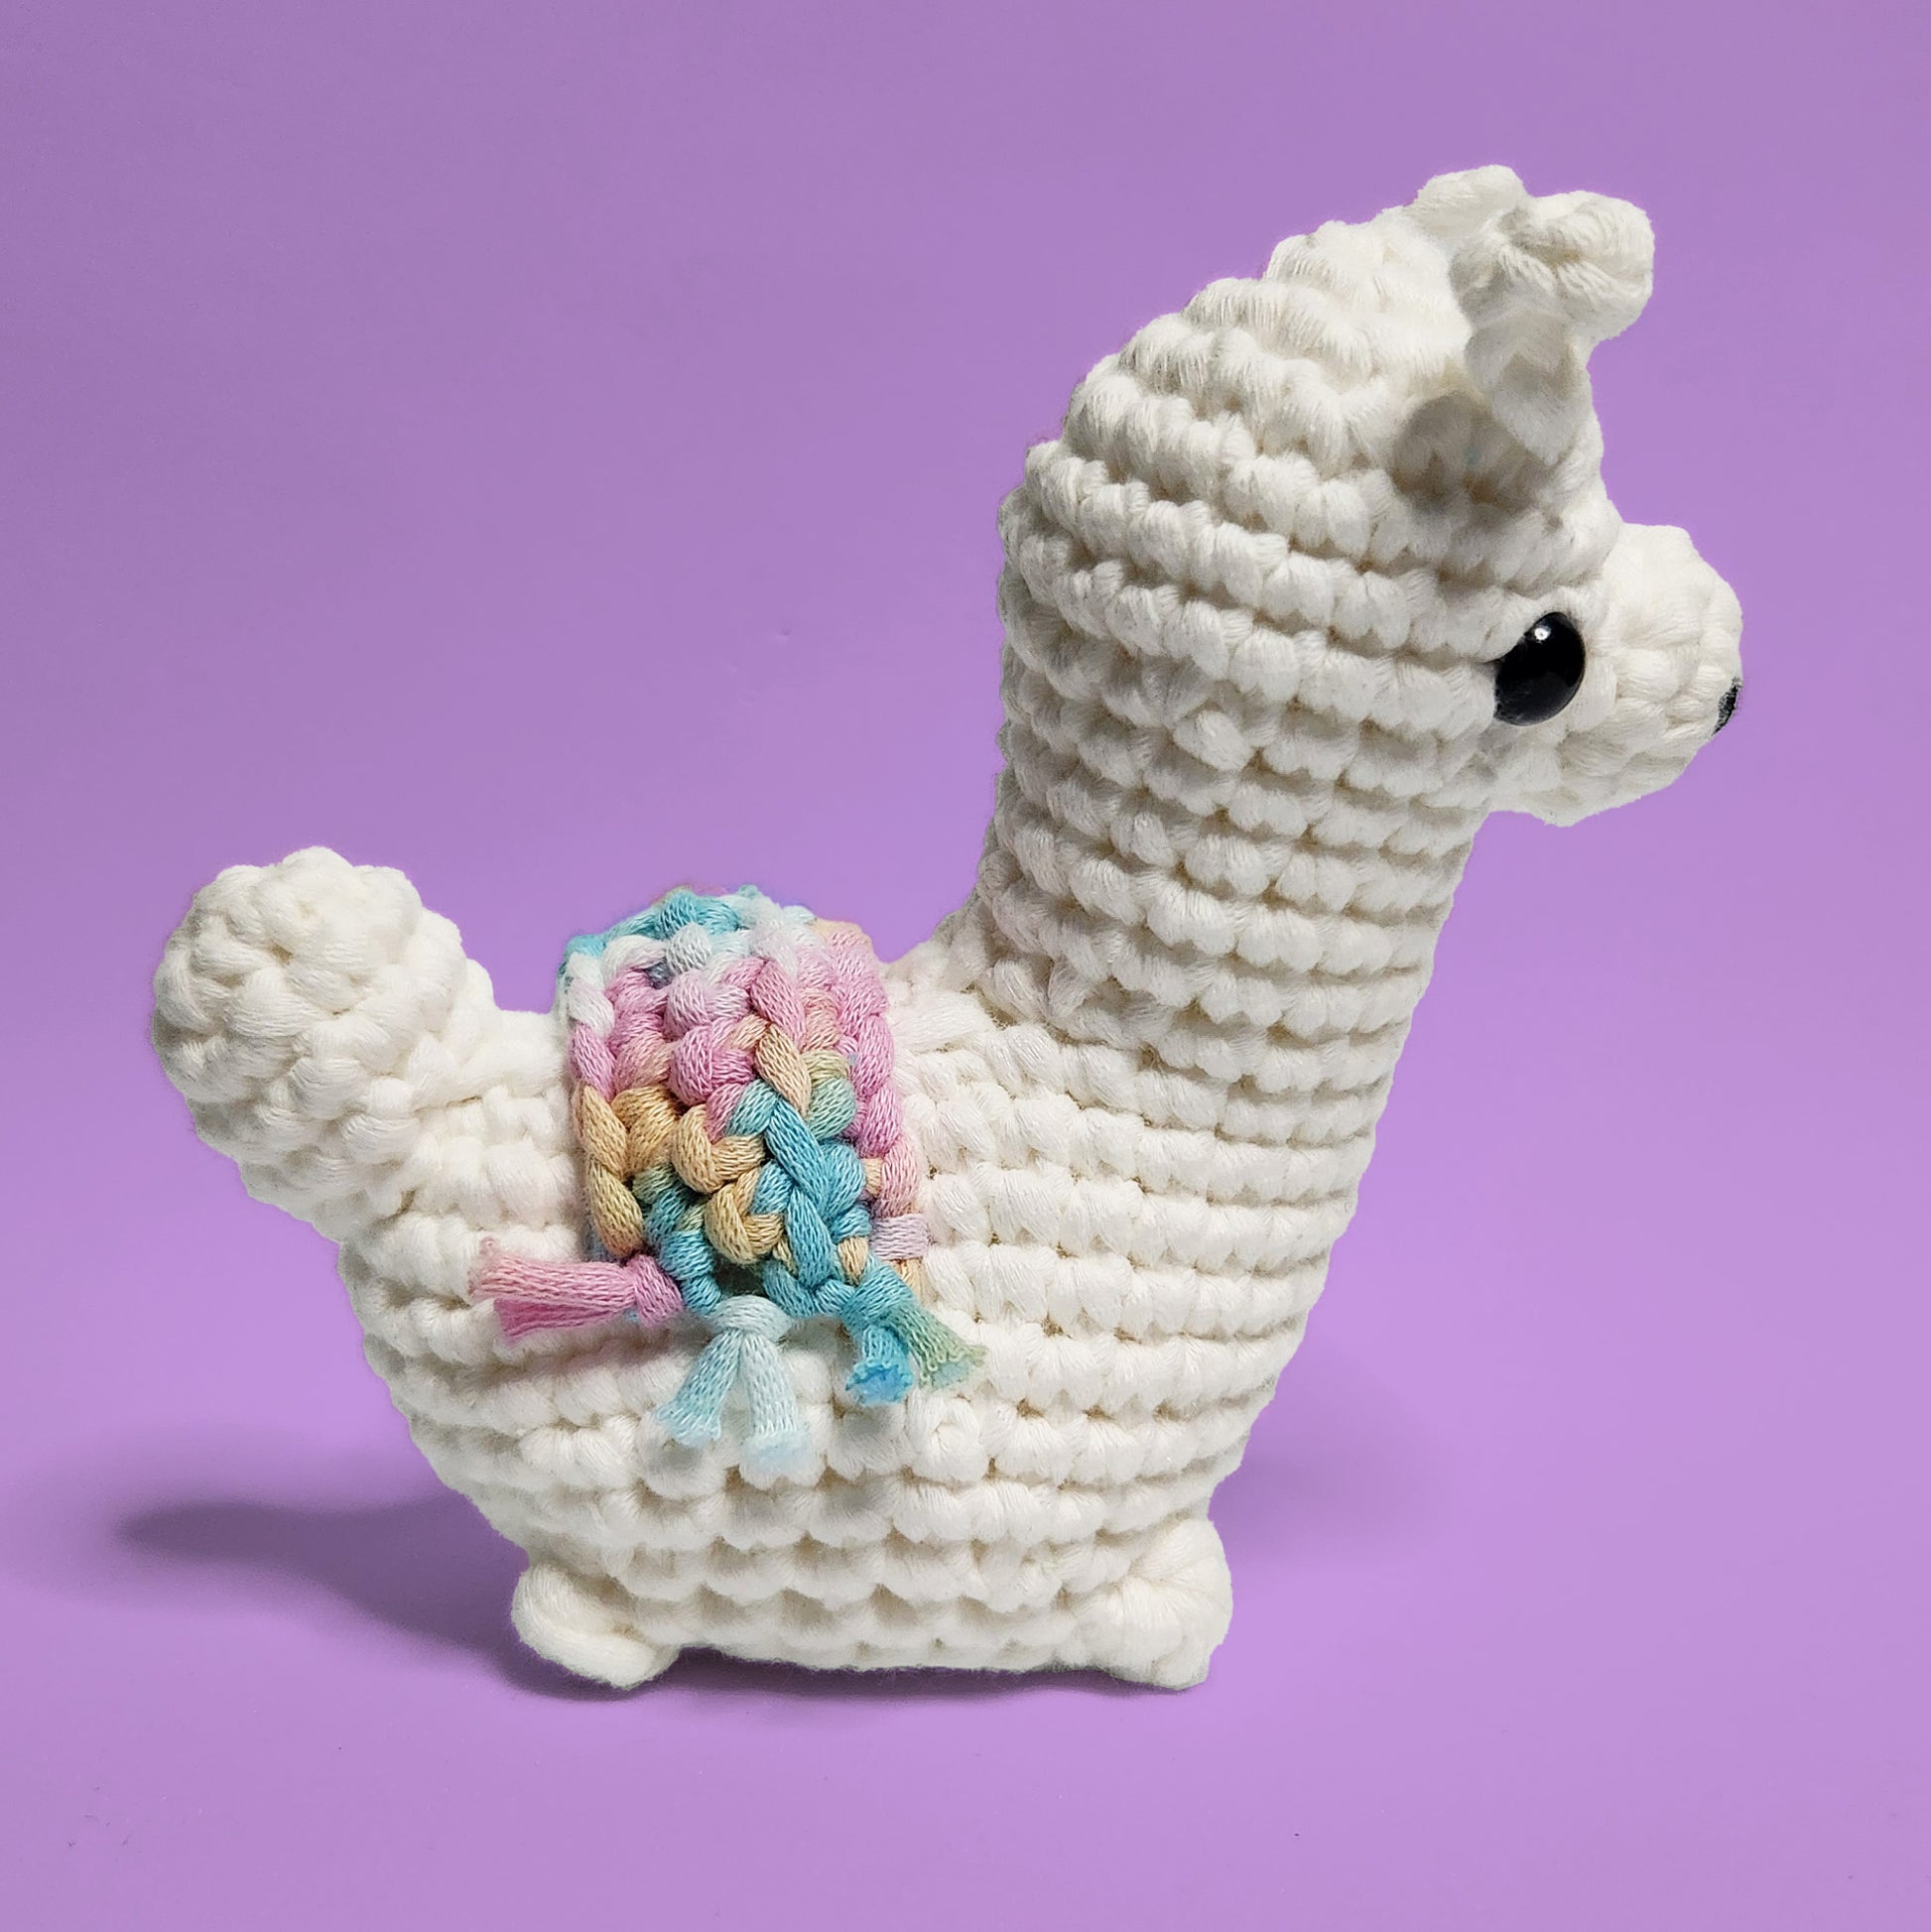 White alpaca crochet amigurumi with a rainbow yarn saddle, made from our beginner-friendly crochet kit. Handcrafted with love, this adorable alpaca is perfect for beginners and alpaca enthusiasts. Side view showcasing its charming design and colorful saddle.